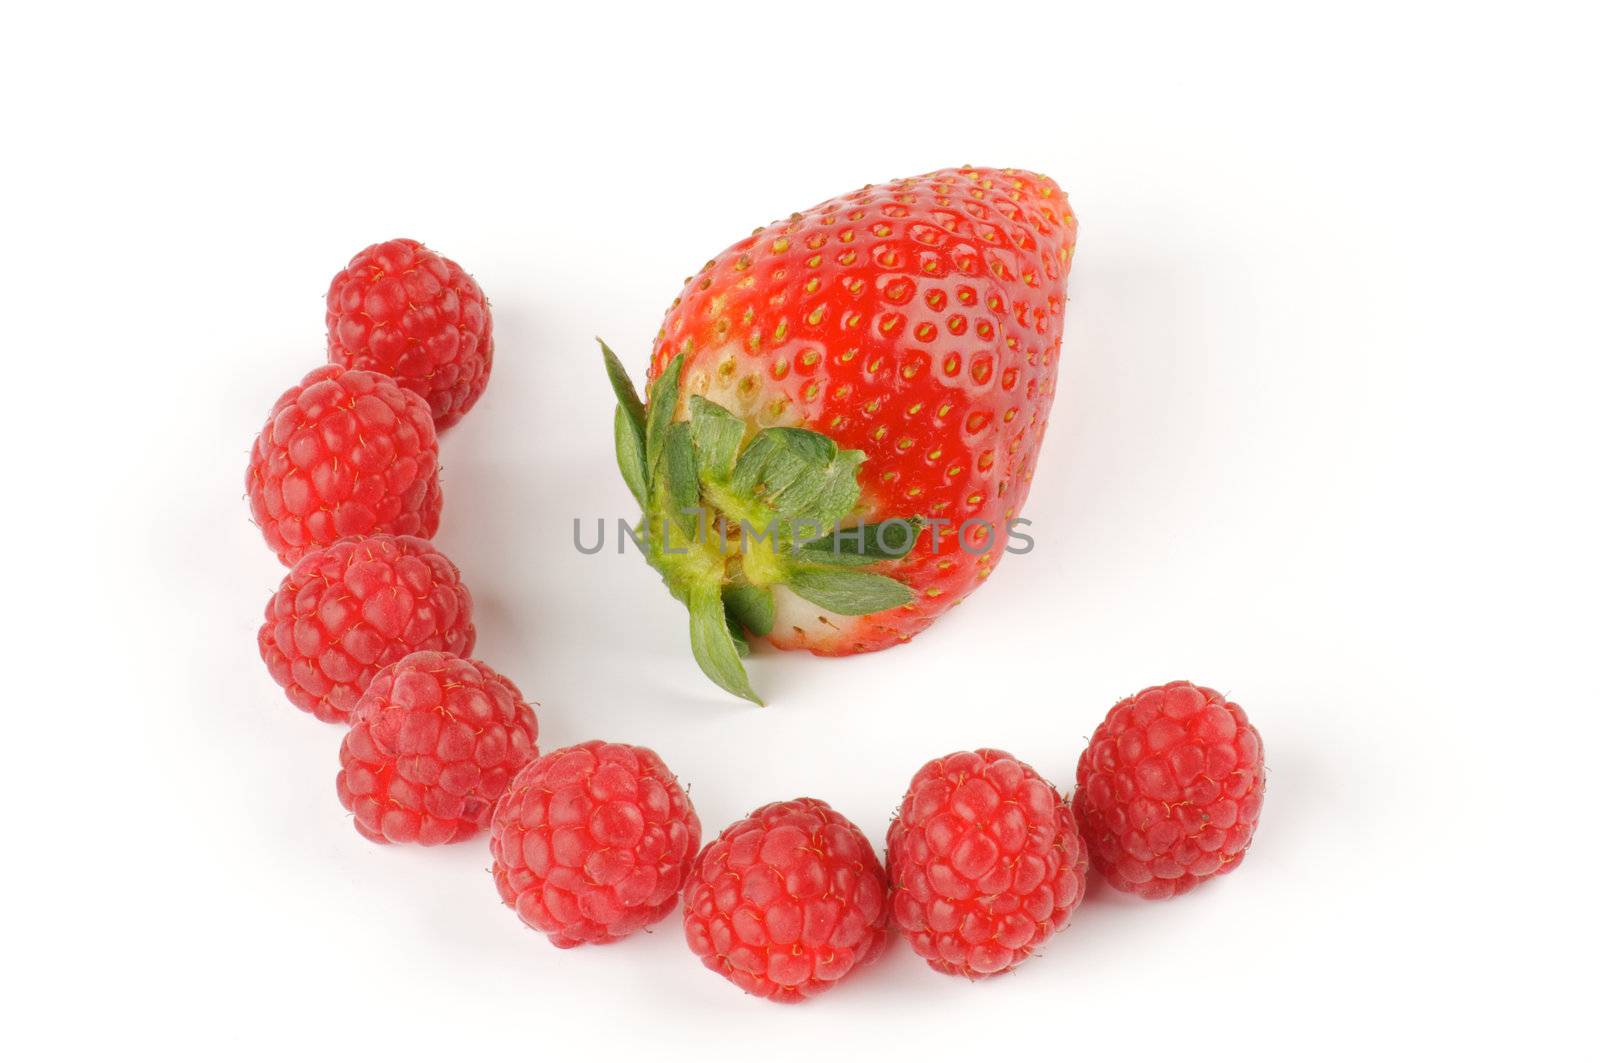 Arrangement of Strawberry and raspberries isolated on white background